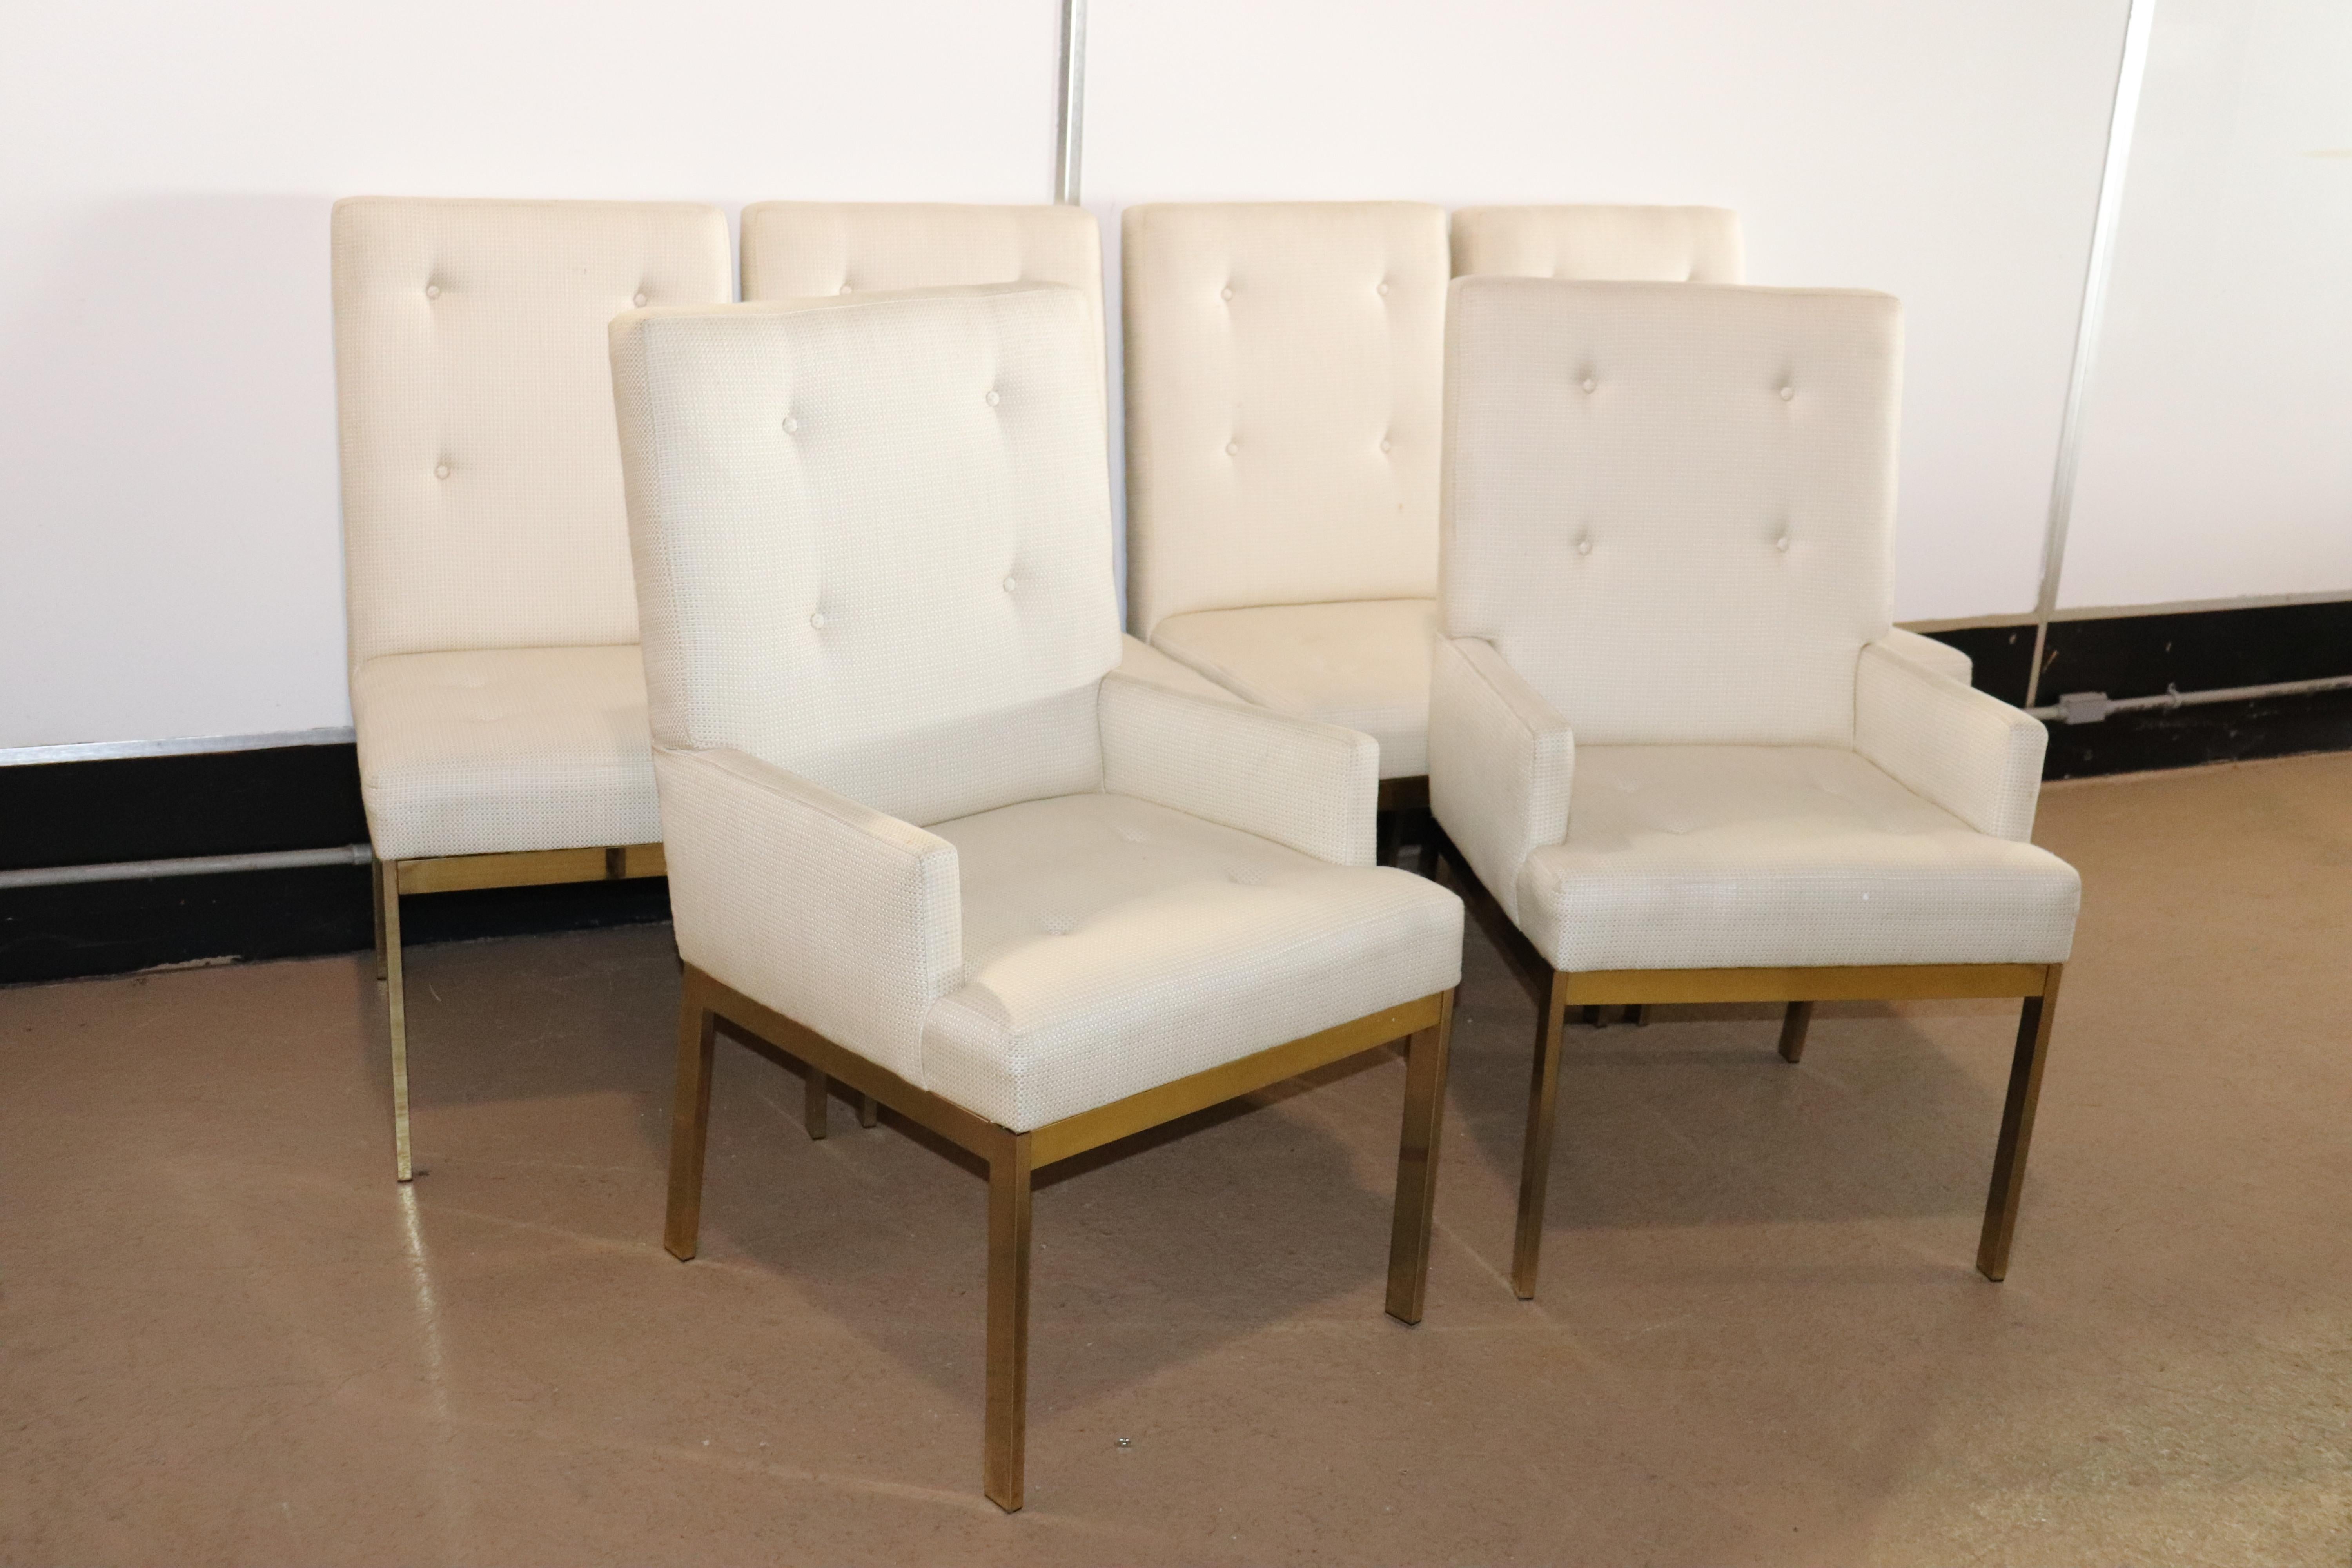 This is a nice set of 6 Milo Baughman style dining chairs done in a white textured upholstery and a brass flashed frame meant to copy Milo Baughman. They are in good used condition and date to the 1980s. They each measure 38.5 tall x 26 deep x 23